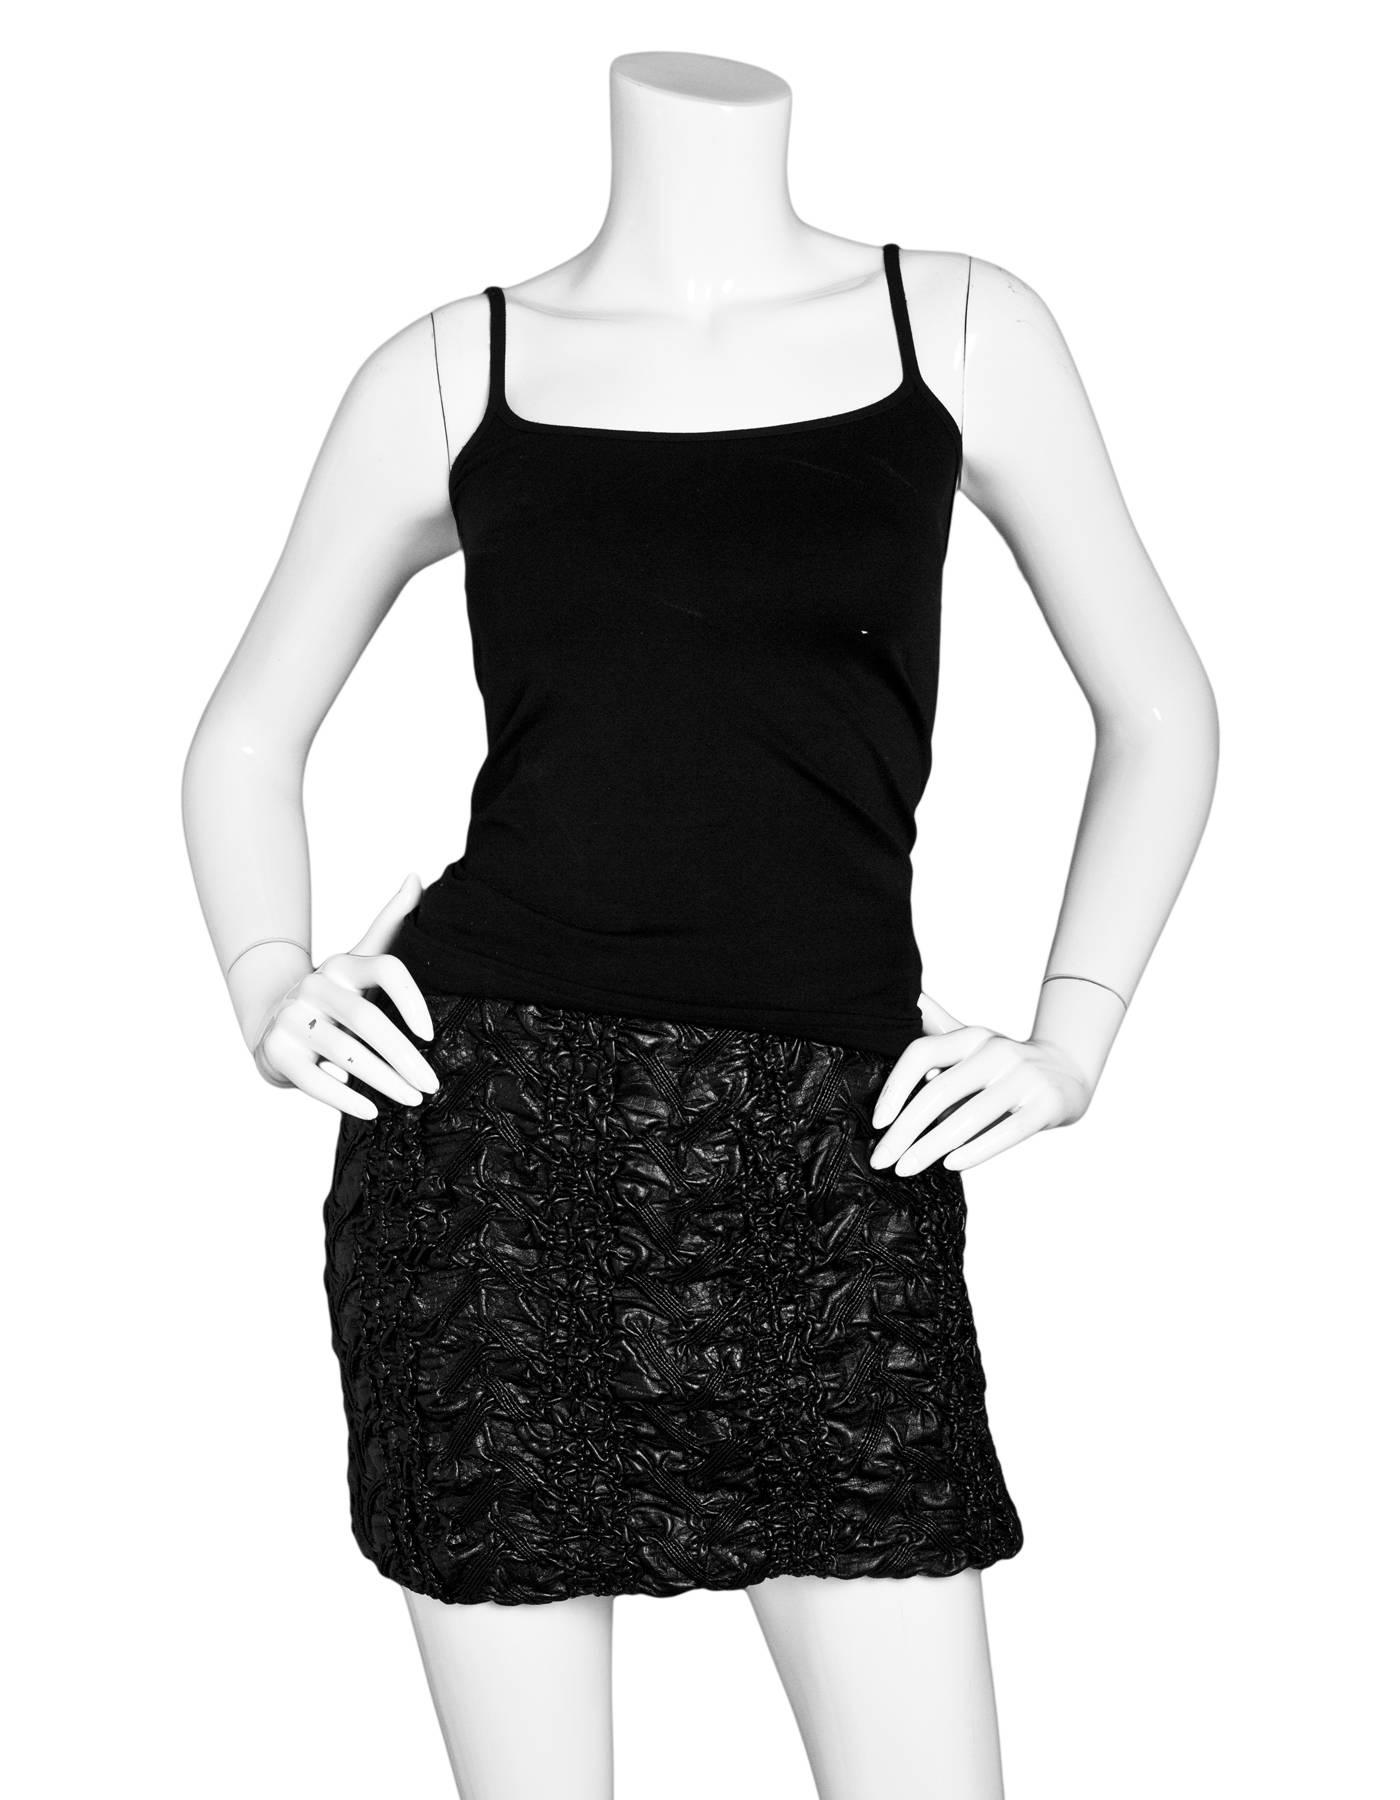 Rodarte Black Ruched Faux Leather Mini Skirt Sz 6

Made In: USA
Color: Black
Composition: 100% polyurethane
Closure/Opening: Side zip closure
Overall Condition: Excellent pre-owned condition
Marked Size: US 6
Waist: 25